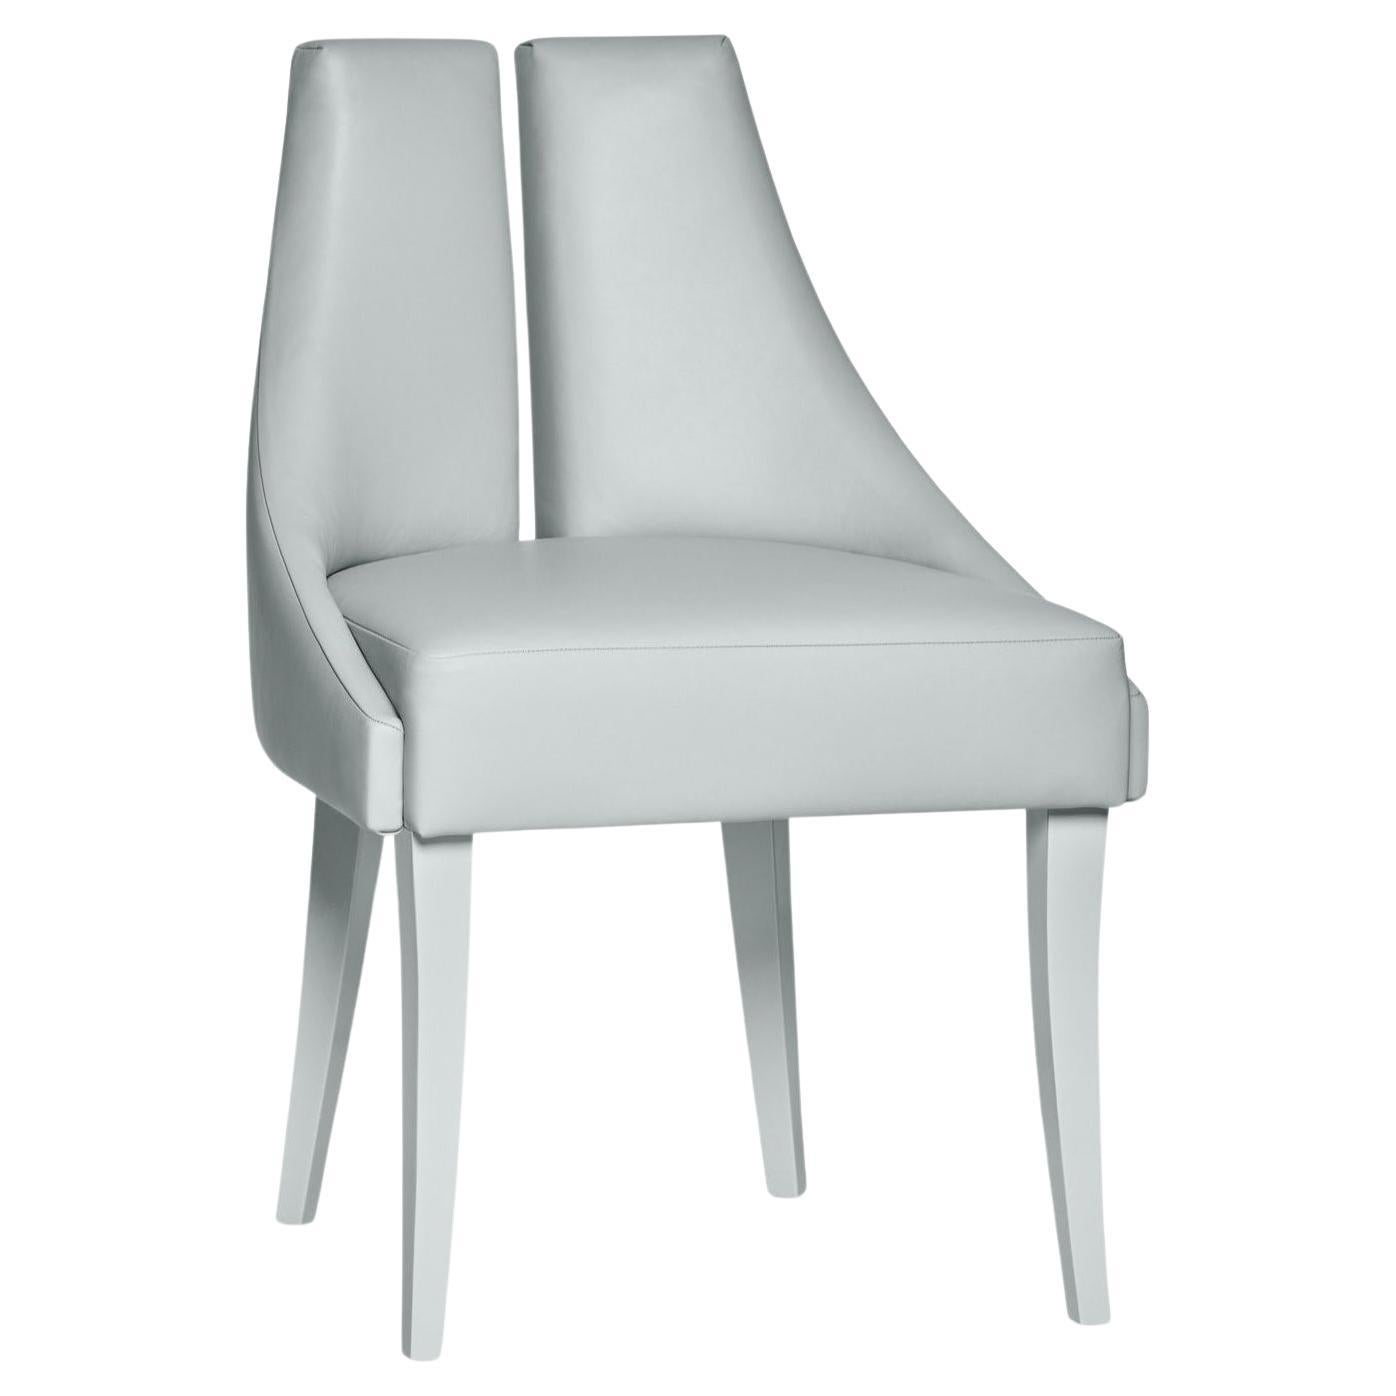 Contemporary Dining Chair w/ Seaming Details For Sale